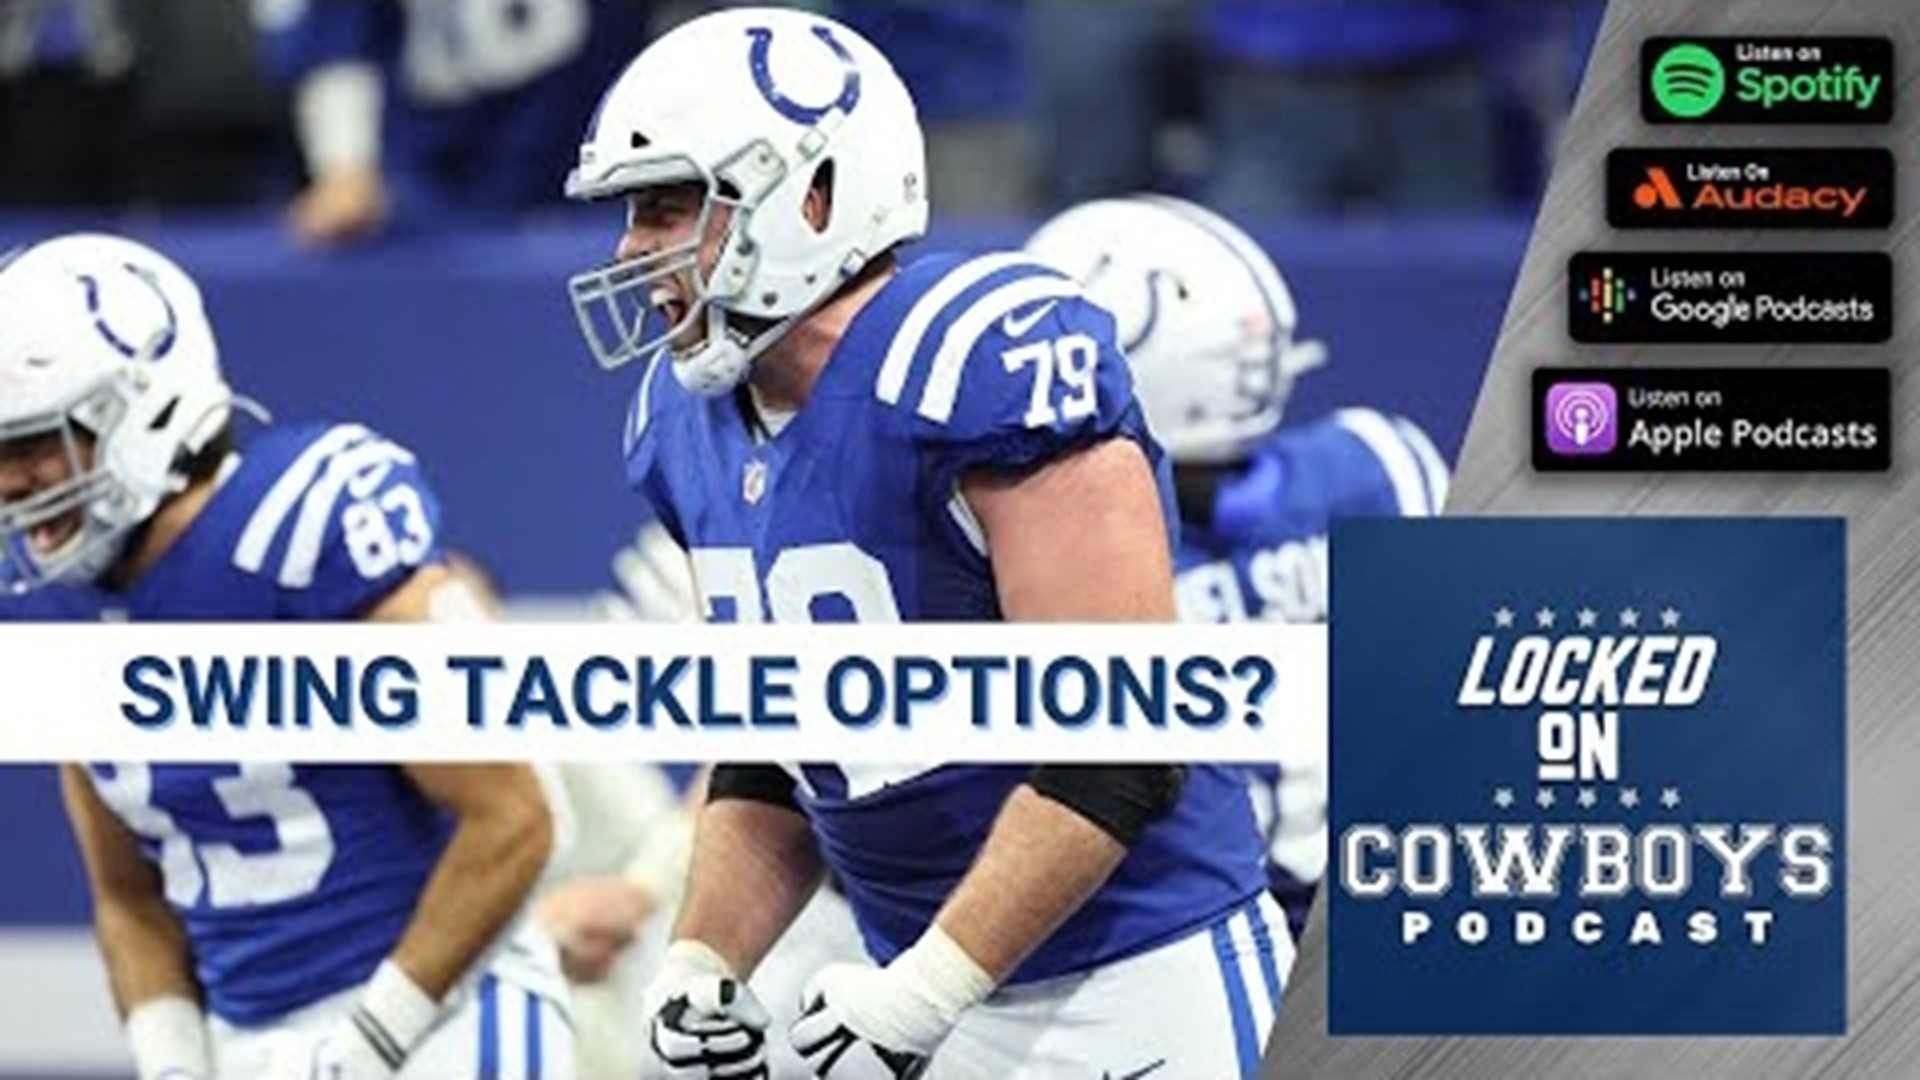 Marcus Mosher and Landon McCool discuss several swing tackle options for the Dallas Cowboys including Eric Fisher, Nate Solder, Jason Peters, and more!